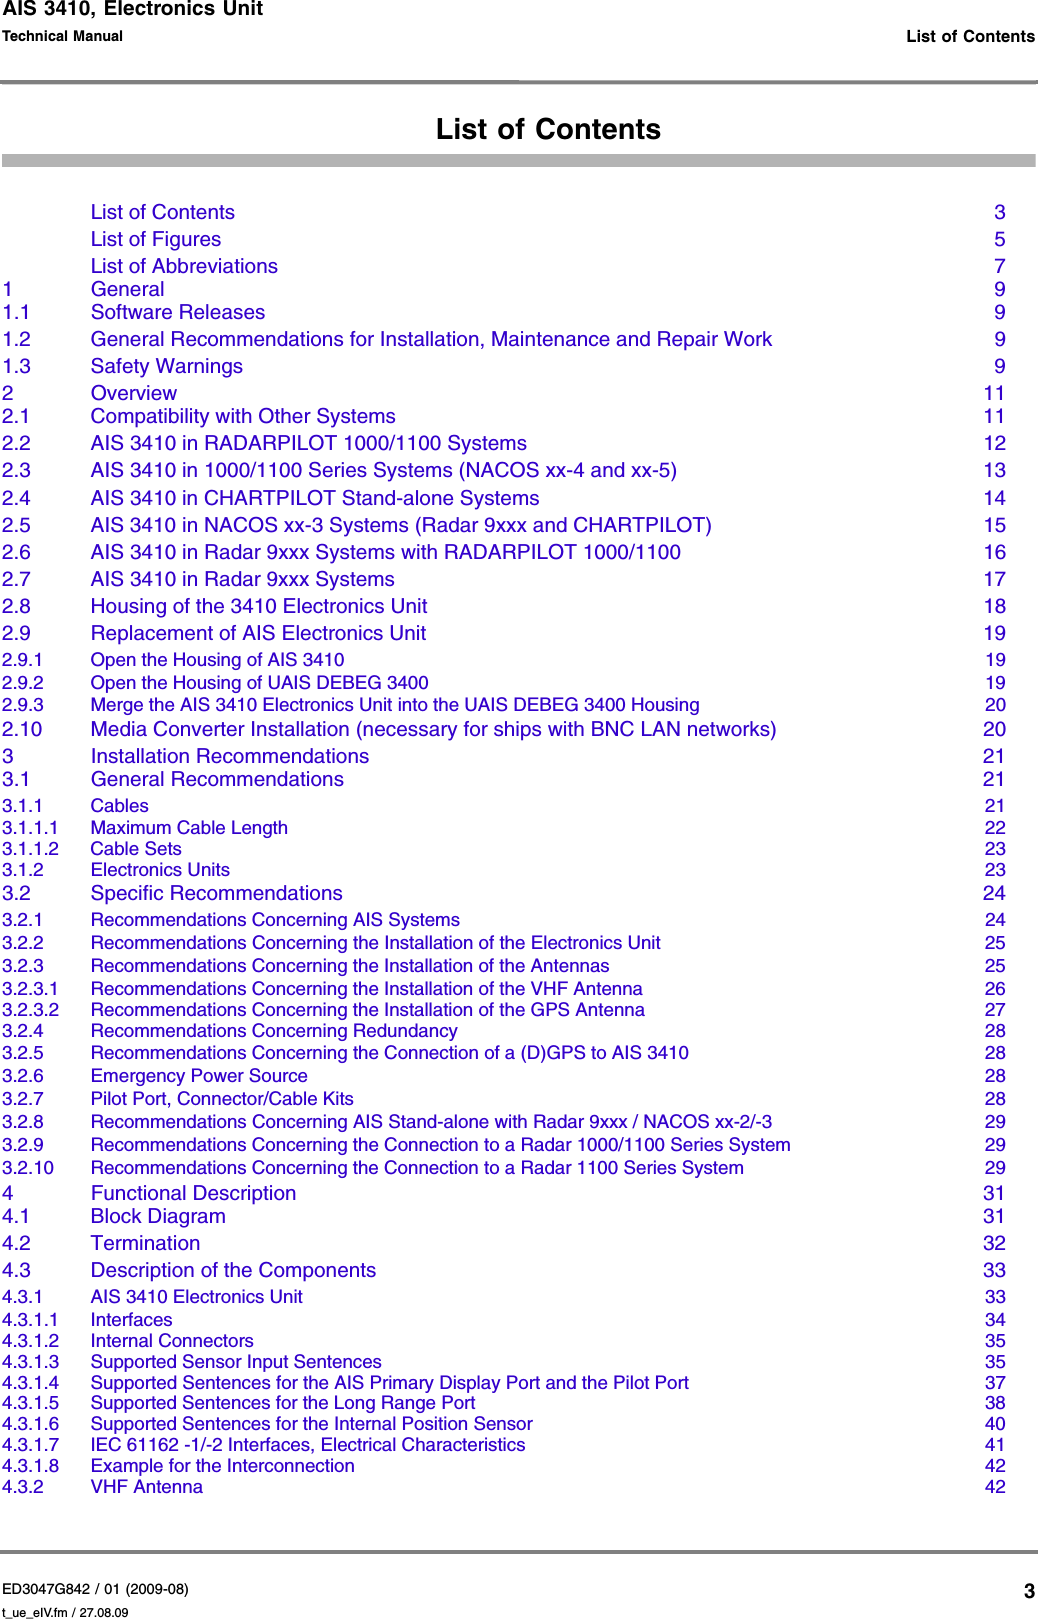 AIS 3410, Electronics UnitED3047G842 / 01 (2009-08)Technical Manual   List of Contentst_ue_eIV.fm / 27.08.093List of ContentsList of Contents  3List of Figures  5List of Abbreviations  71 General  91.1 Software Releases  91.2 General Recommendations for Installation, Maintenance and Repair Work  91.3 Safety Warnings  92Overview  112.1 Compatibility with Other Systems  112.2 AIS 3410 in RADARPILOT 1000/1100 Systems  122.3 AIS 3410 in 1000/1100 Series Systems (NACOS xx-4 and xx-5)  132.4 AIS 3410 in CHARTPILOT Stand-alone Systems  142.5 AIS 3410 in NACOS xx-3 Systems (Radar 9xxx and CHARTPILOT)  152.6 AIS 3410 in Radar 9xxx Systems with RADARPILOT 1000/1100  162.7 AIS 3410 in Radar 9xxx Systems  172.8 Housing of the 3410 Electronics Unit  182.9 Replacement of AIS Electronics Unit  192.9.1 Open the Housing of AIS 3410  192.9.2 Open the Housing of UAIS DEBEG 3400  192.9.3 Merge the AIS 3410 Electronics Unit into the UAIS DEBEG 3400 Housing  202.10 Media Converter Installation (necessary for ships with BNC LAN networks)  203 Installation Recommendations  213.1 General Recommendations  213.1.1 Cables  213.1.1.1 Maximum Cable Length  223.1.1.2 Cable Sets  233.1.2 Electronics Units  233.2 Specific Recommendations  243.2.1 Recommendations Concerning AIS Systems  243.2.2 Recommendations Concerning the Installation of the Electronics Unit  253.2.3 Recommendations Concerning the Installation of the Antennas  253.2.3.1 Recommendations Concerning the Installation of the VHF Antenna  263.2.3.2 Recommendations Concerning the Installation of the GPS Antenna  273.2.4 Recommendations Concerning Redundancy  283.2.5 Recommendations Concerning the Connection of a (D)GPS to AIS 3410  283.2.6 Emergency Power Source  283.2.7 Pilot Port, Connector/Cable Kits  283.2.8 Recommendations Concerning AIS Stand-alone with Radar 9xxx / NACOS xx-2/-3  293.2.9 Recommendations Concerning the Connection to a Radar 1000/1100 Series System  293.2.10 Recommendations Concerning the Connection to a Radar 1100 Series System  294 Functional Description  314.1 Block Diagram  314.2 Termination  324.3 Description of the Components  334.3.1 AIS 3410 Electronics Unit  334.3.1.1 Interfaces  344.3.1.2 Internal Connectors  354.3.1.3 Supported Sensor Input Sentences  354.3.1.4 Supported Sentences for the AIS Primary Display Port and the Pilot Port  374.3.1.5 Supported Sentences for the Long Range Port  384.3.1.6 Supported Sentences for the Internal Position Sensor  404.3.1.7 IEC 61162 -1/-2 Interfaces, Electrical Characteristics  414.3.1.8 Example for the Interconnection  424.3.2 VHF Antenna  42